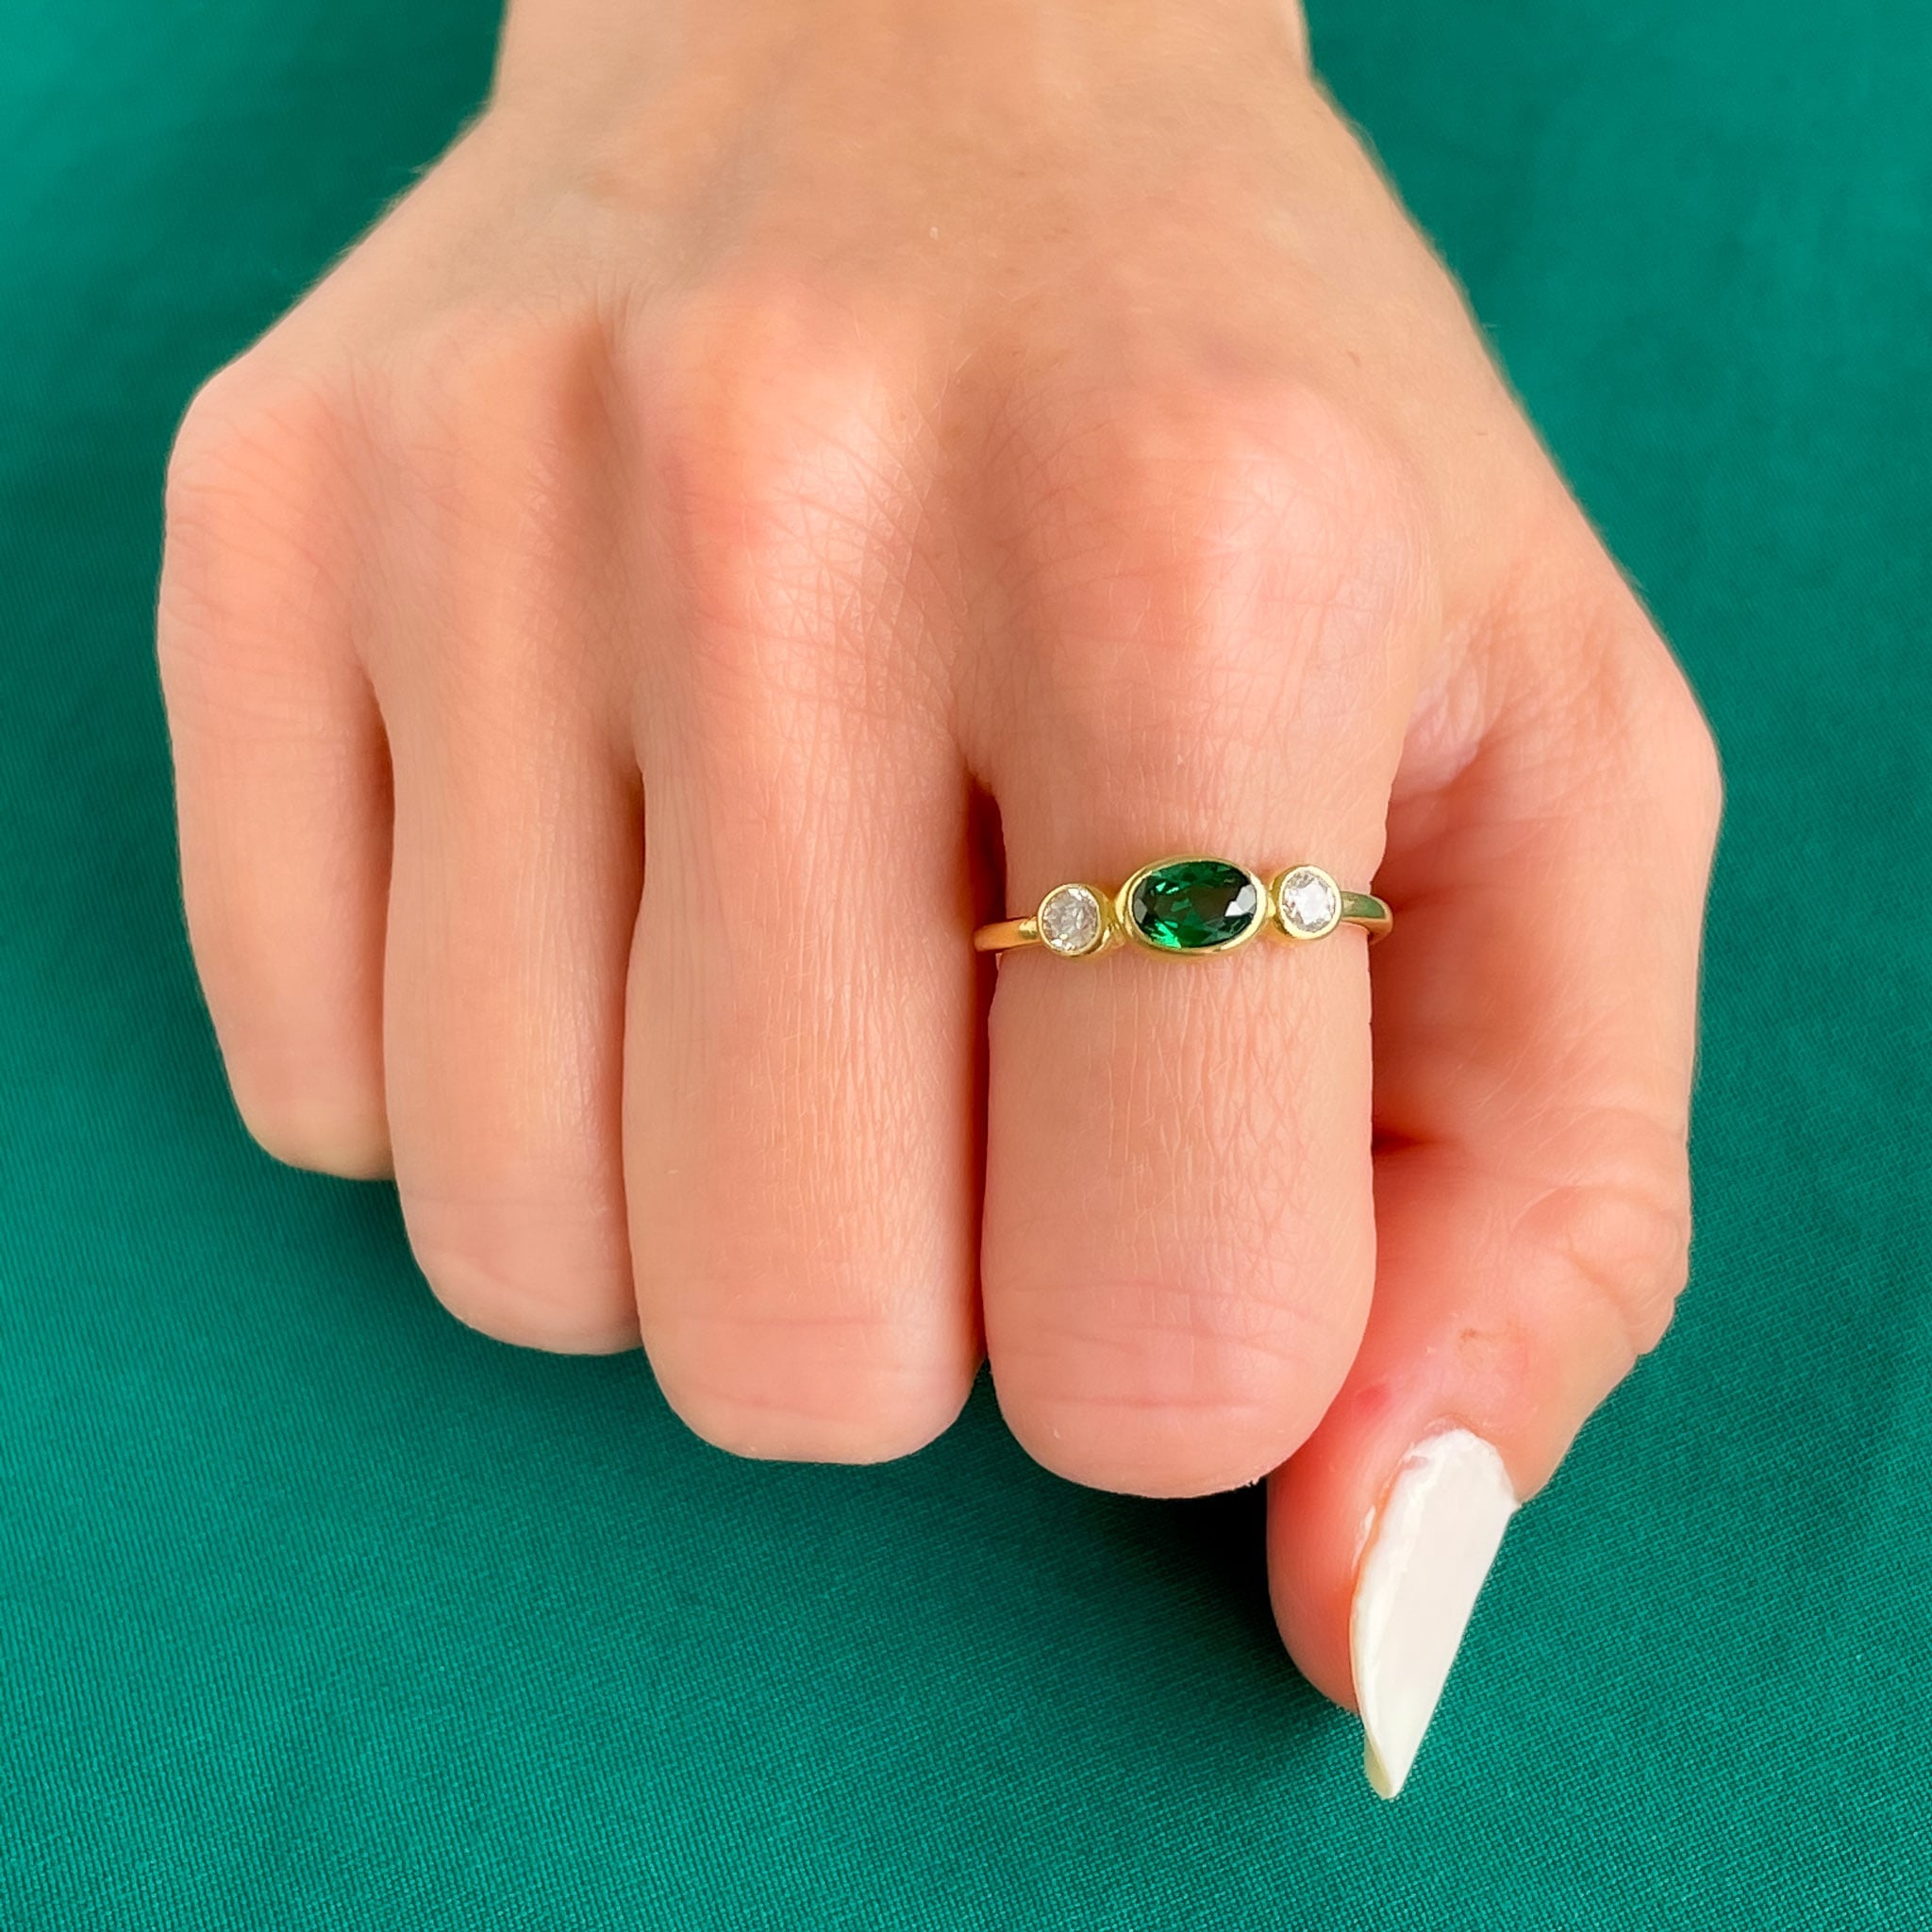 Emerald Green Oval Stone Ring